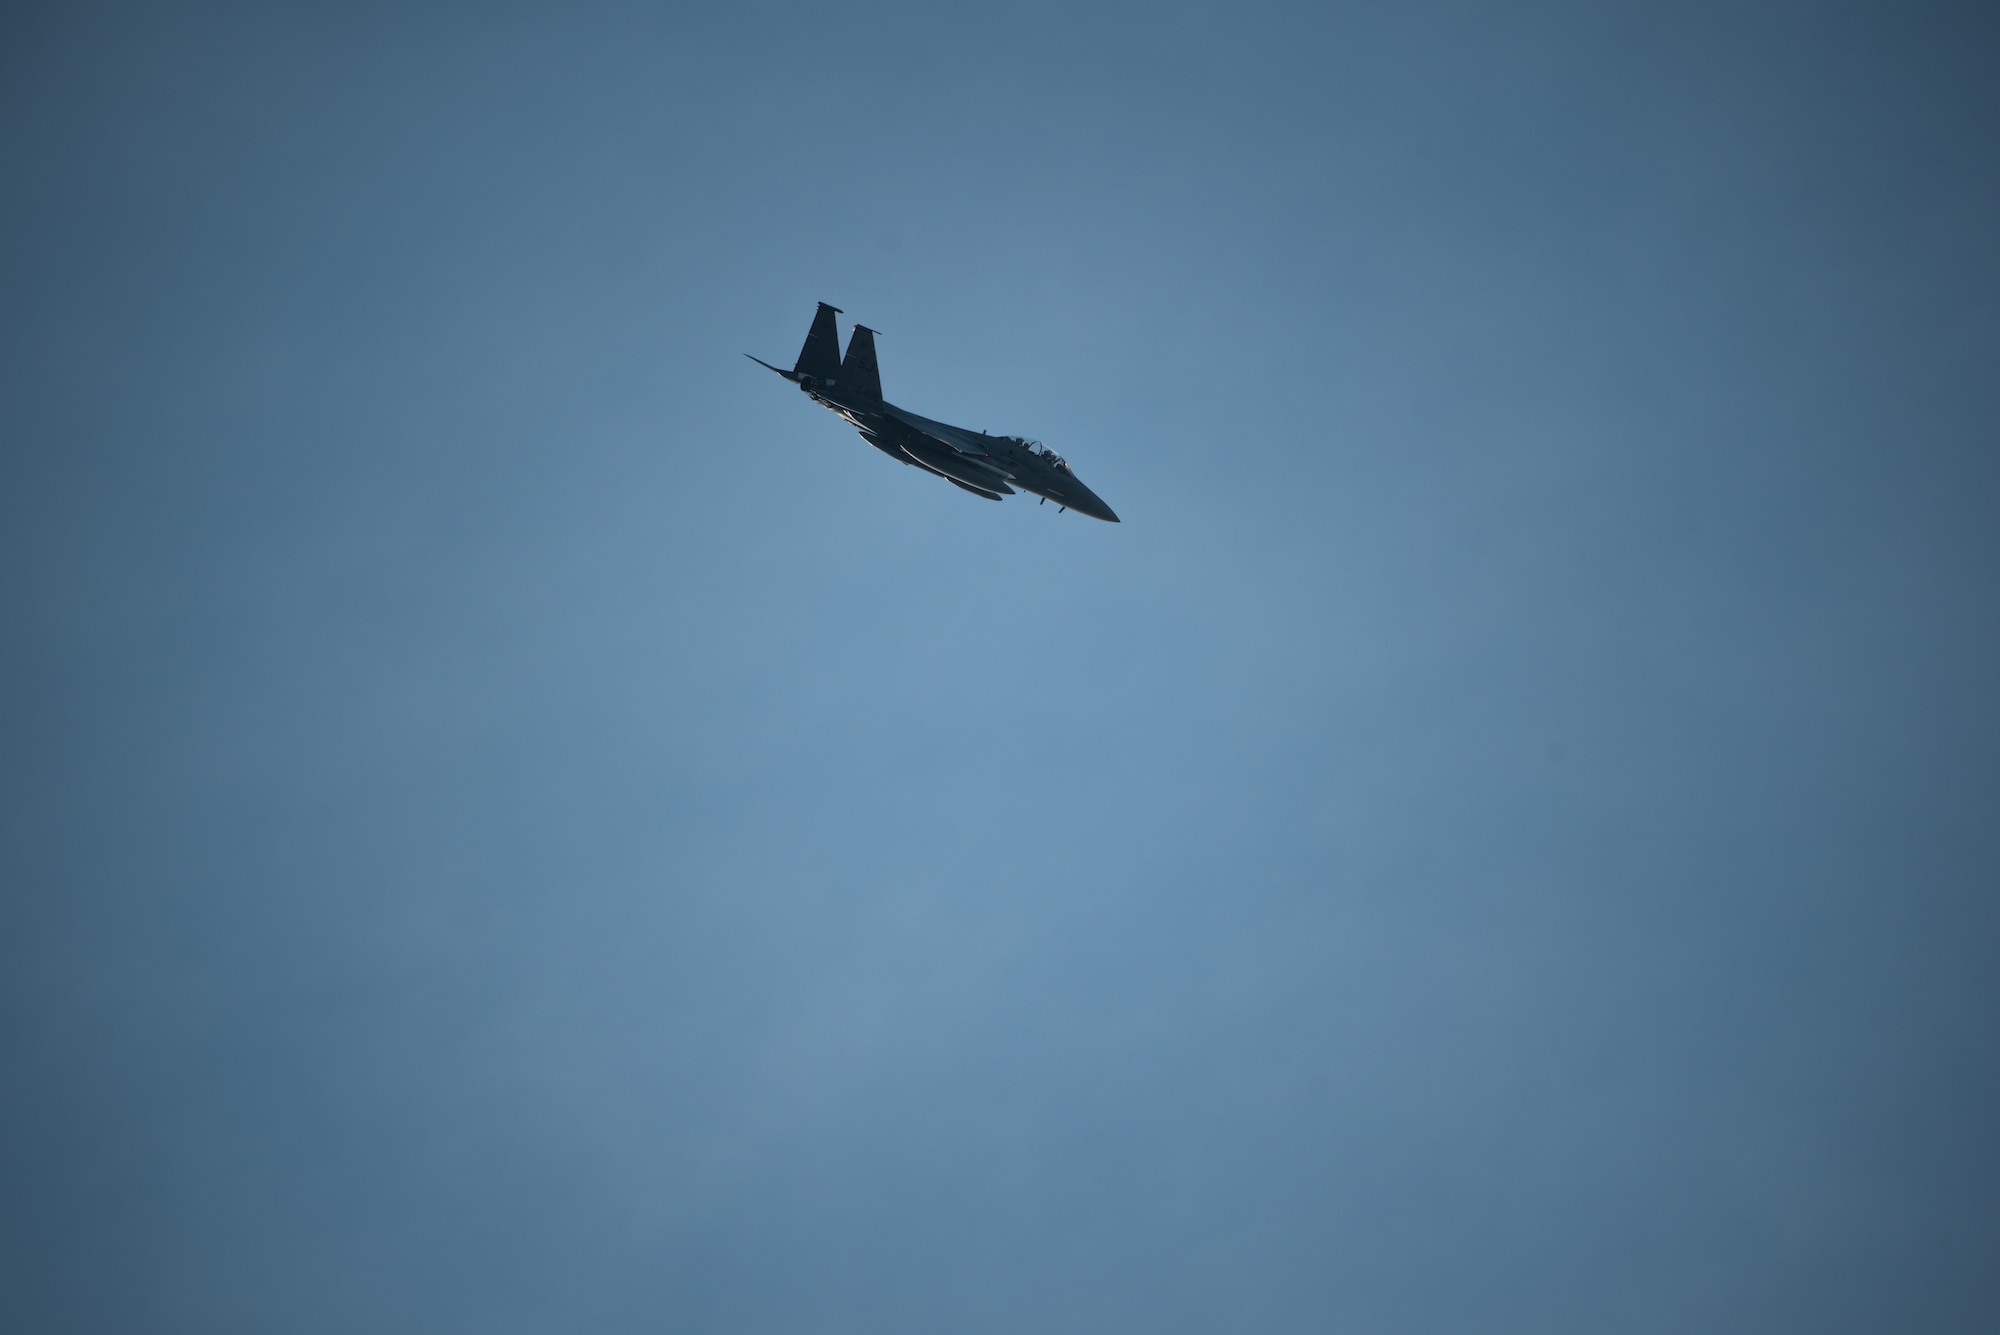 An F-15E Strike Eagle deployed from the 4th Fighter Wing at Seymour Johnson Air Force Base, North Carolina, flies above Al Dhafra Air Base, United Arab Emirates, June 14, 2019. F-15E’s are designed to perform in air-to-air and air-to ground operations in any environment. (U.S. Air Force photo by Staff Sgt. Chris Thornbury)